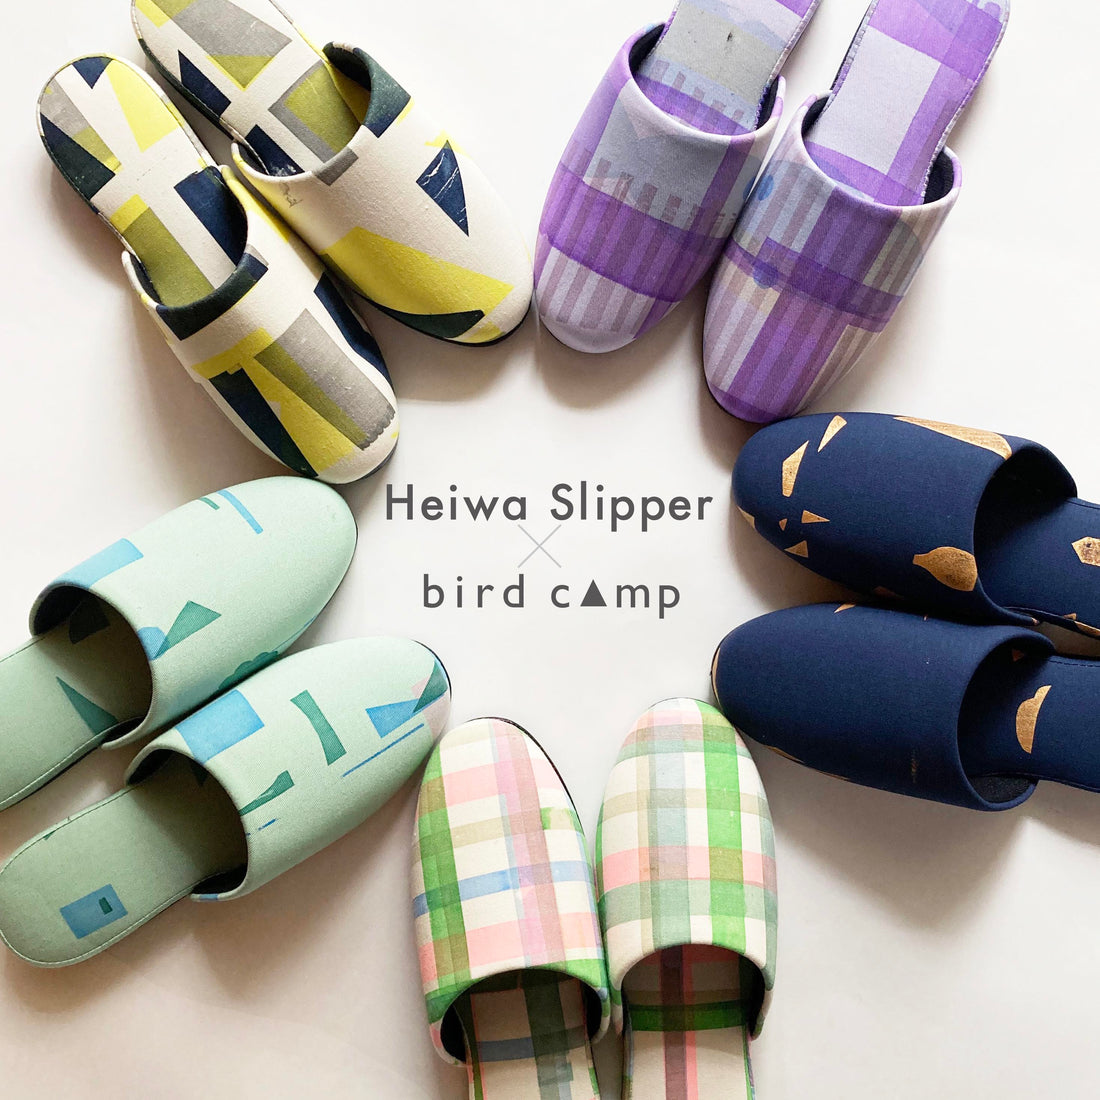 Step into comfort with Bird Camp and Heiwa Slipper's exclusive slippers!